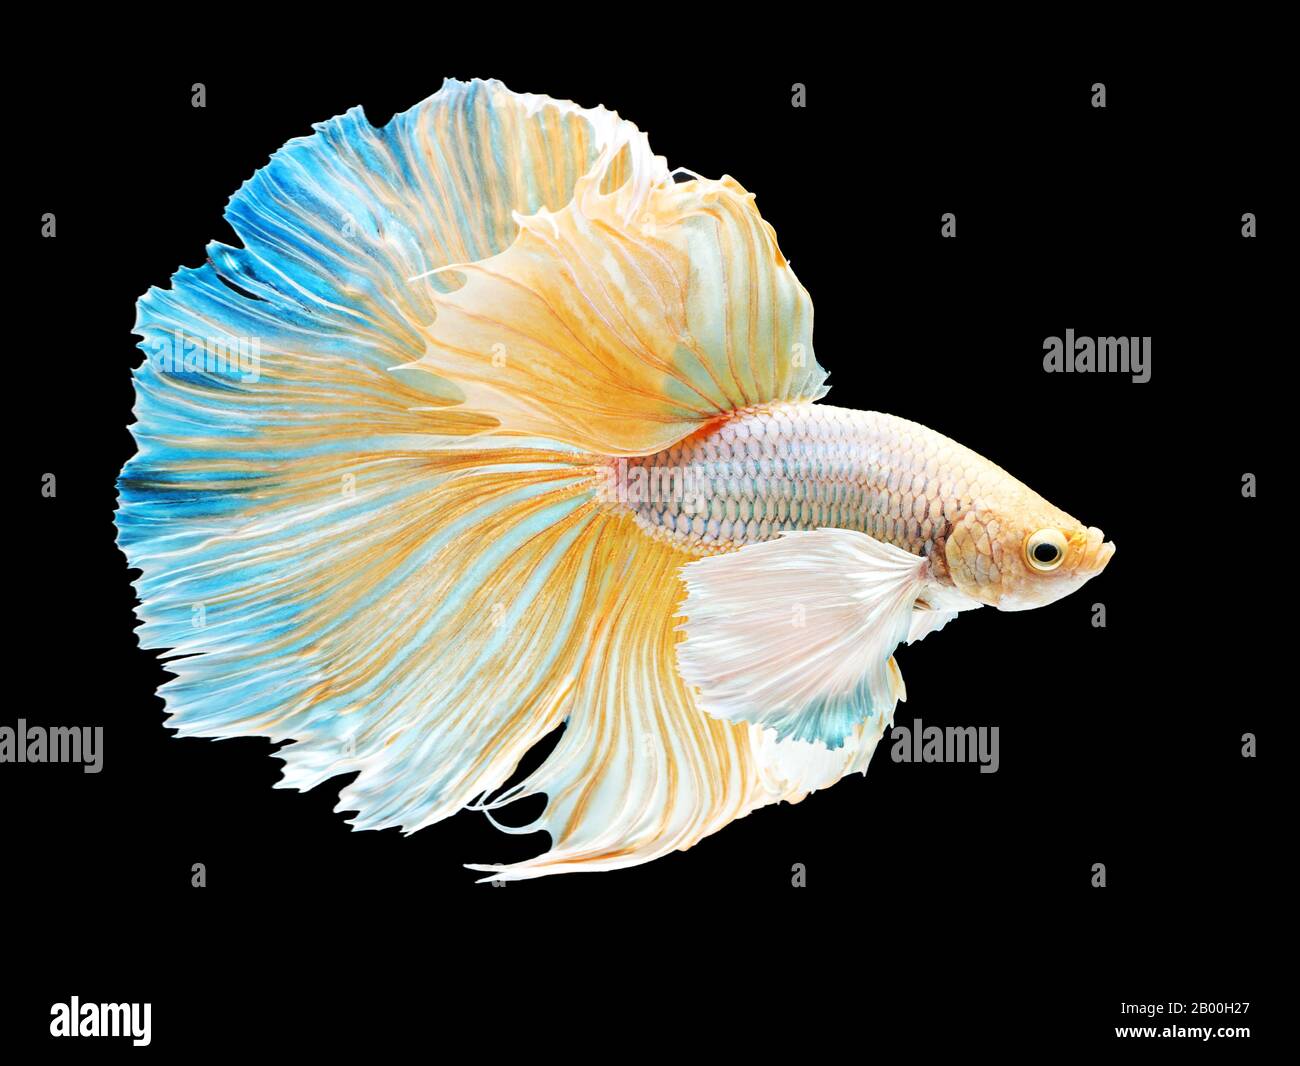 beautiful white Thai fighting fish swimming with long fins and long tail gene. fighting fish isolated on black background. Stock Photo